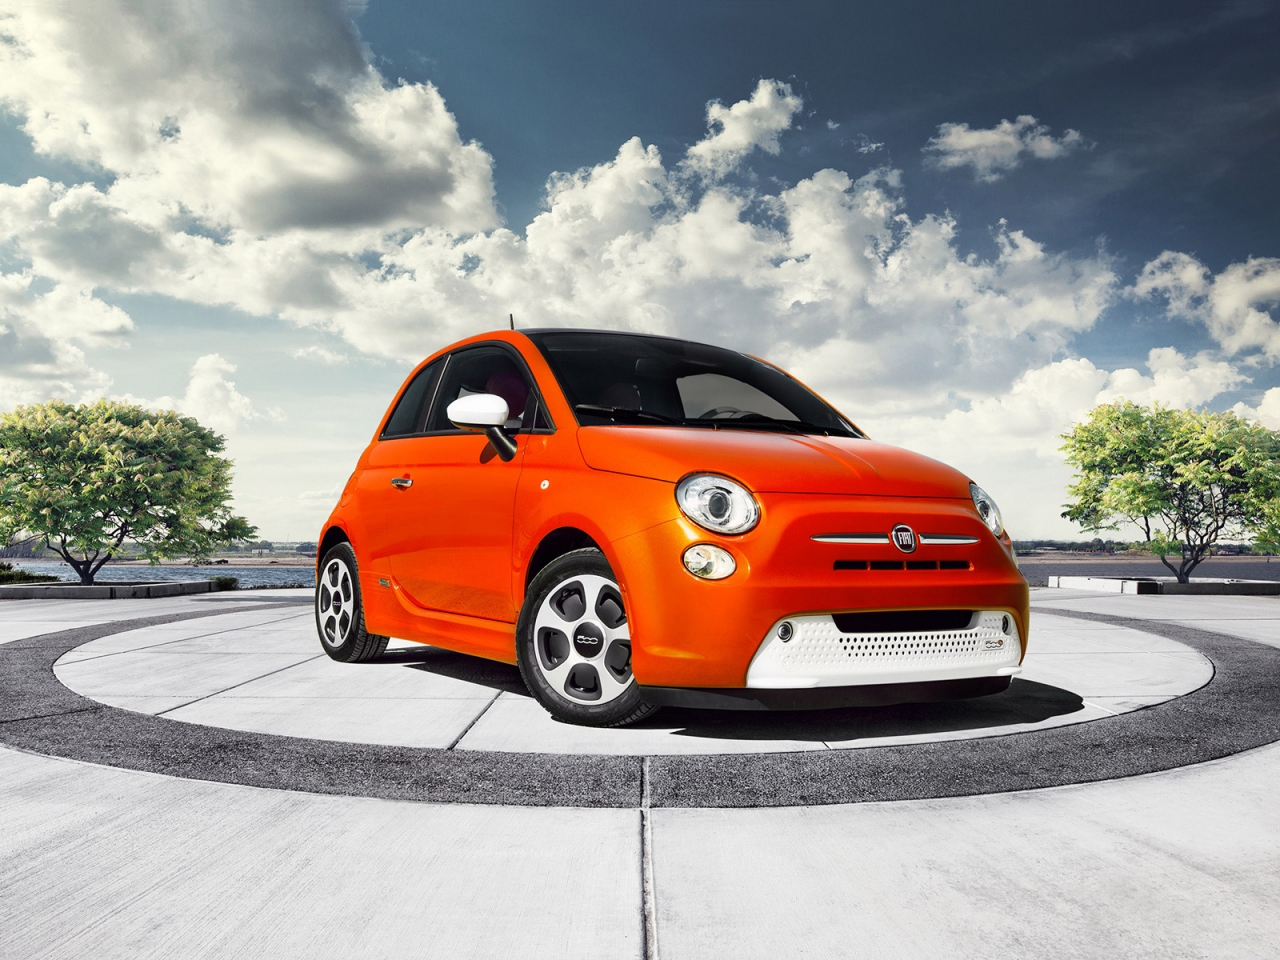 Fiat 500 2013 Edition for 1280 x 960 resolution